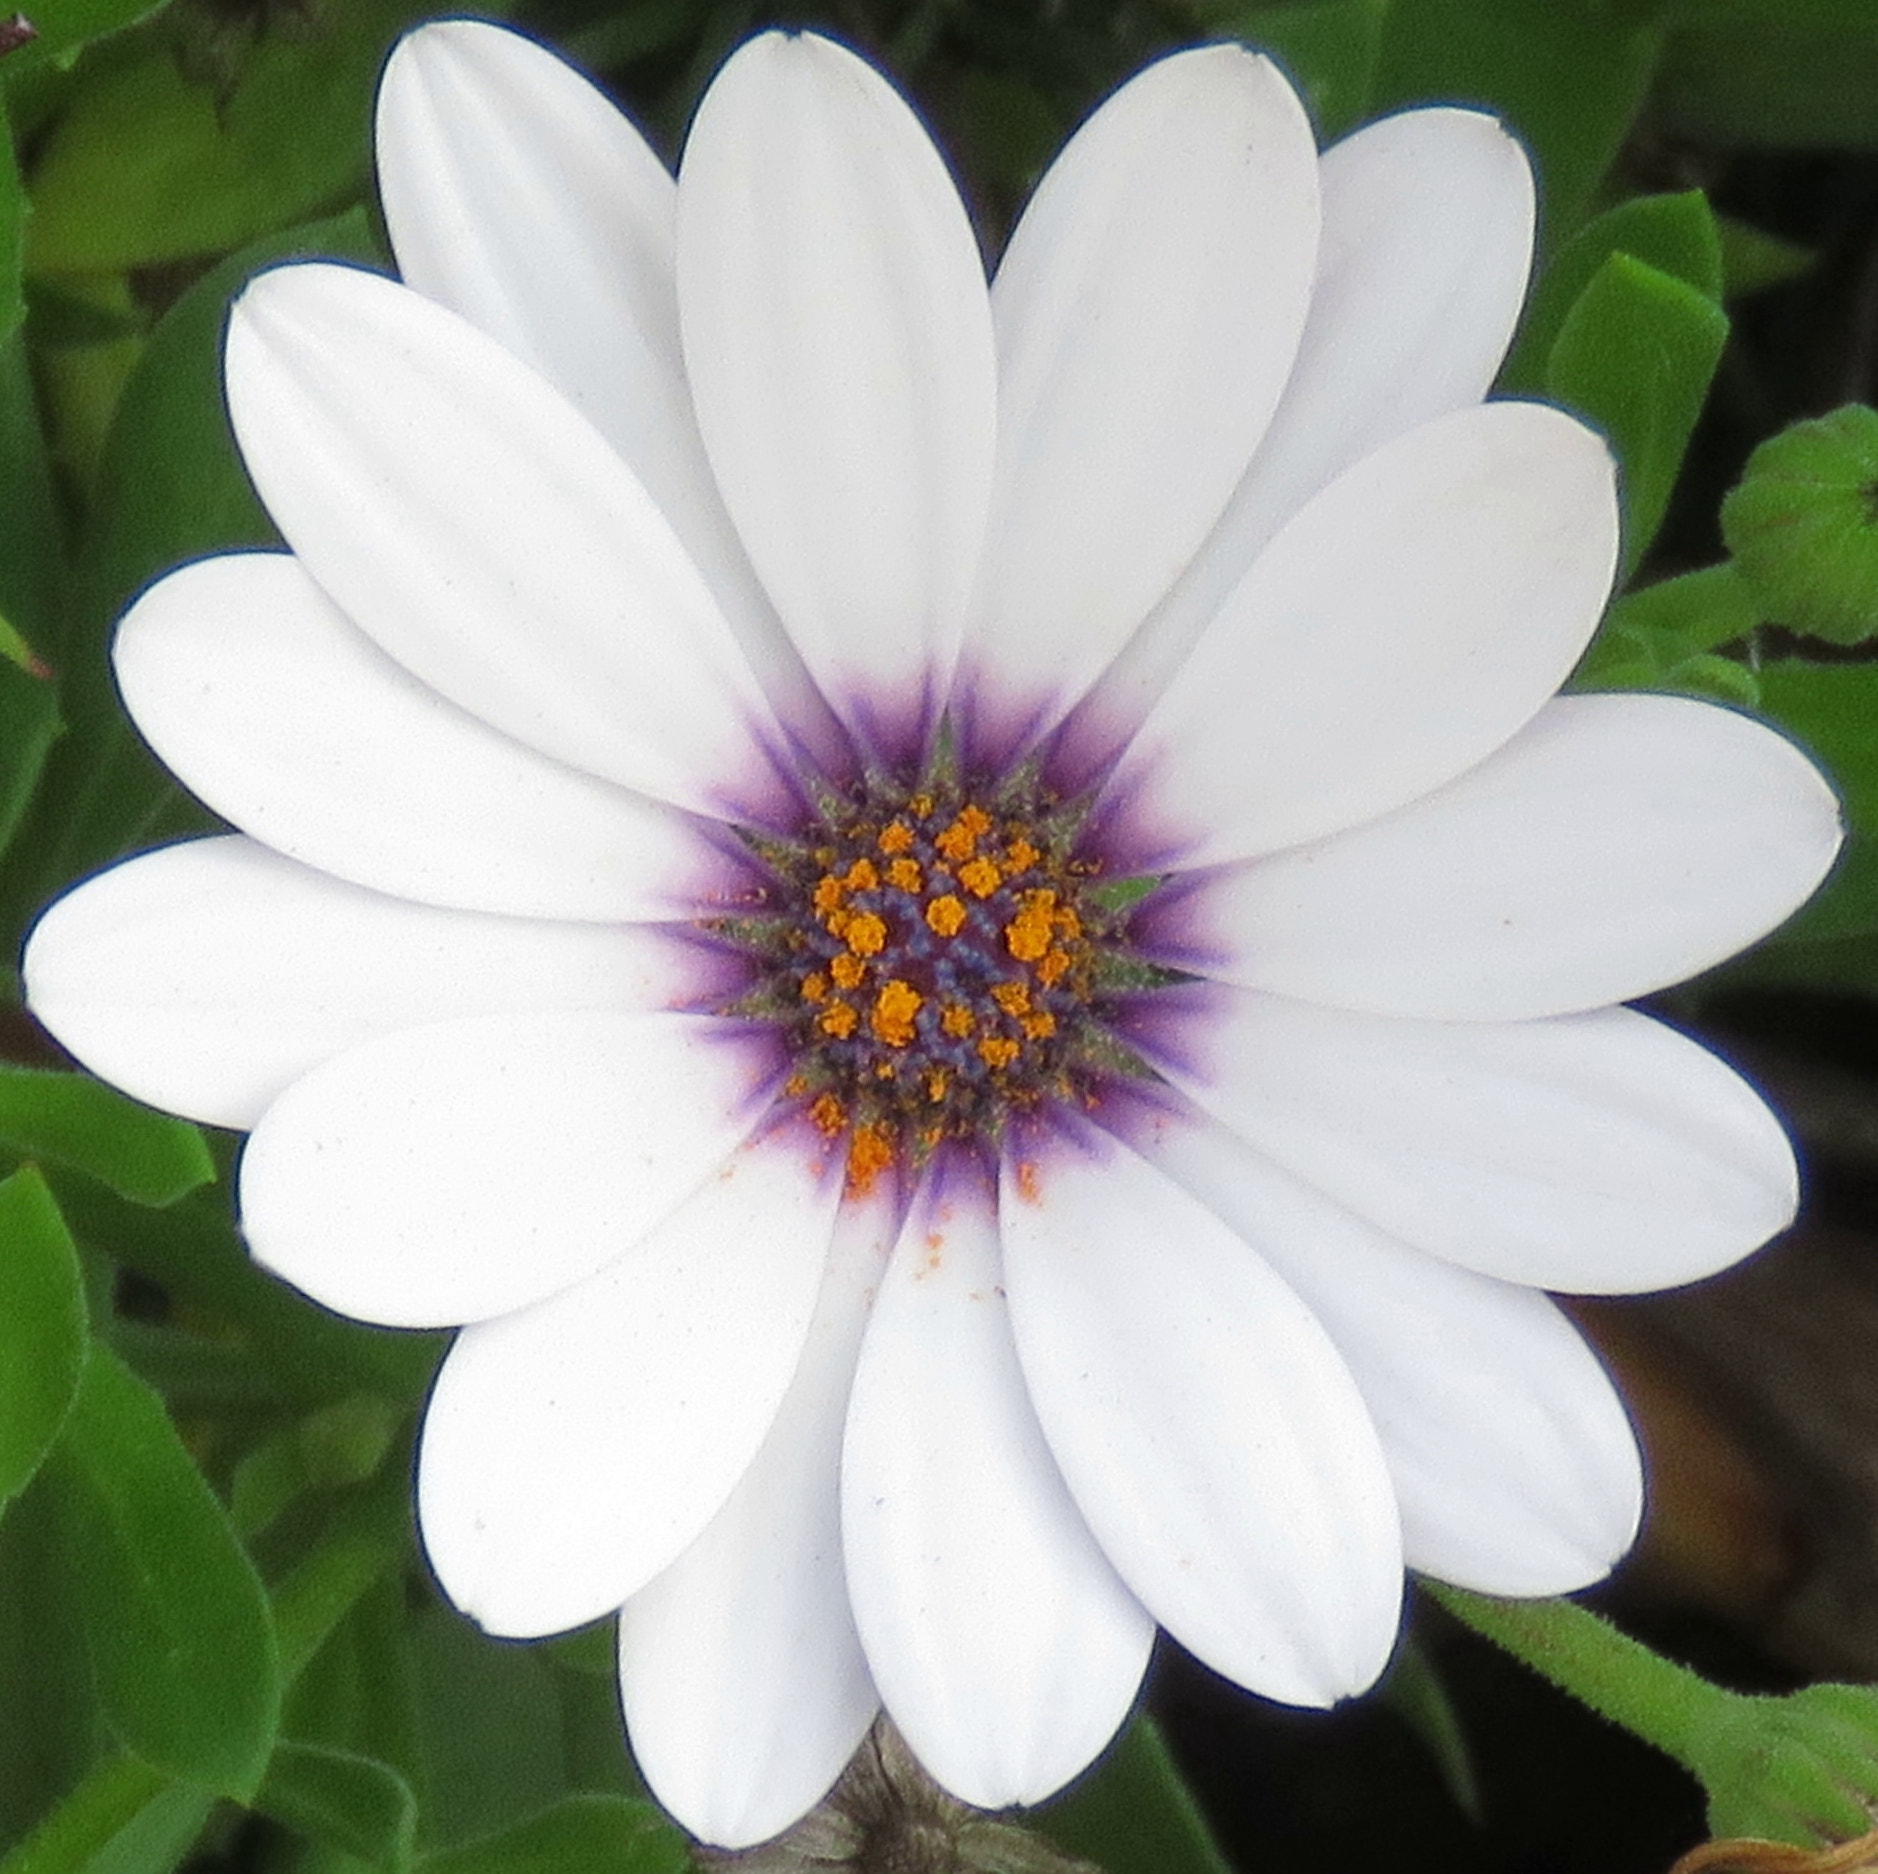 Canon PowerShot SX60 HS sample photo. A white and purple daisy flower photography